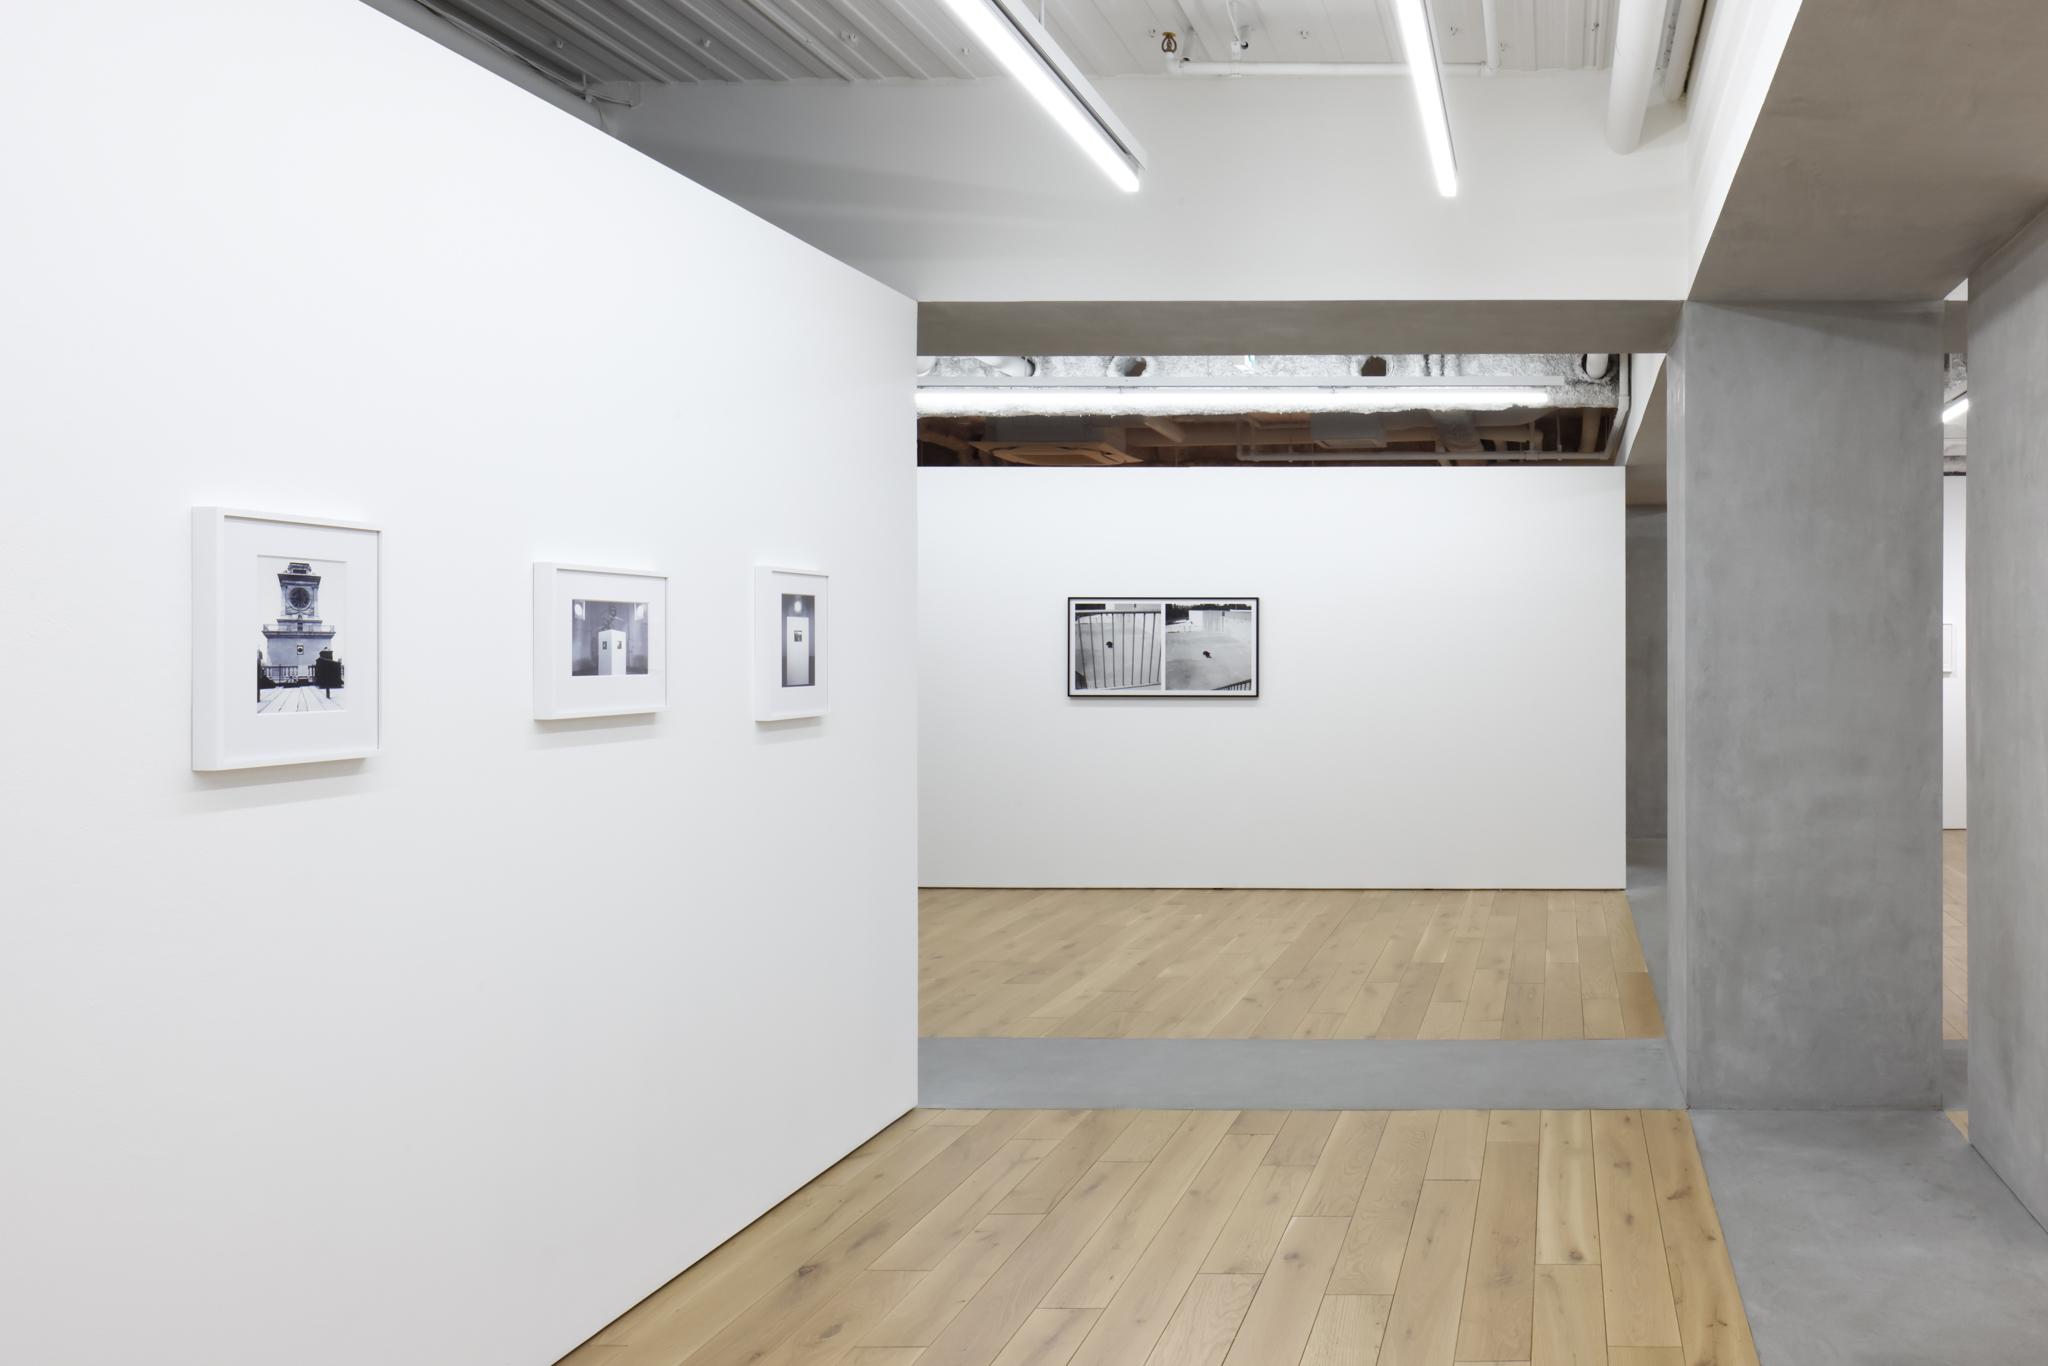 Installation view of the exhibition Nancy Holt Points of View at TARO NASU in Tokyo, Japan